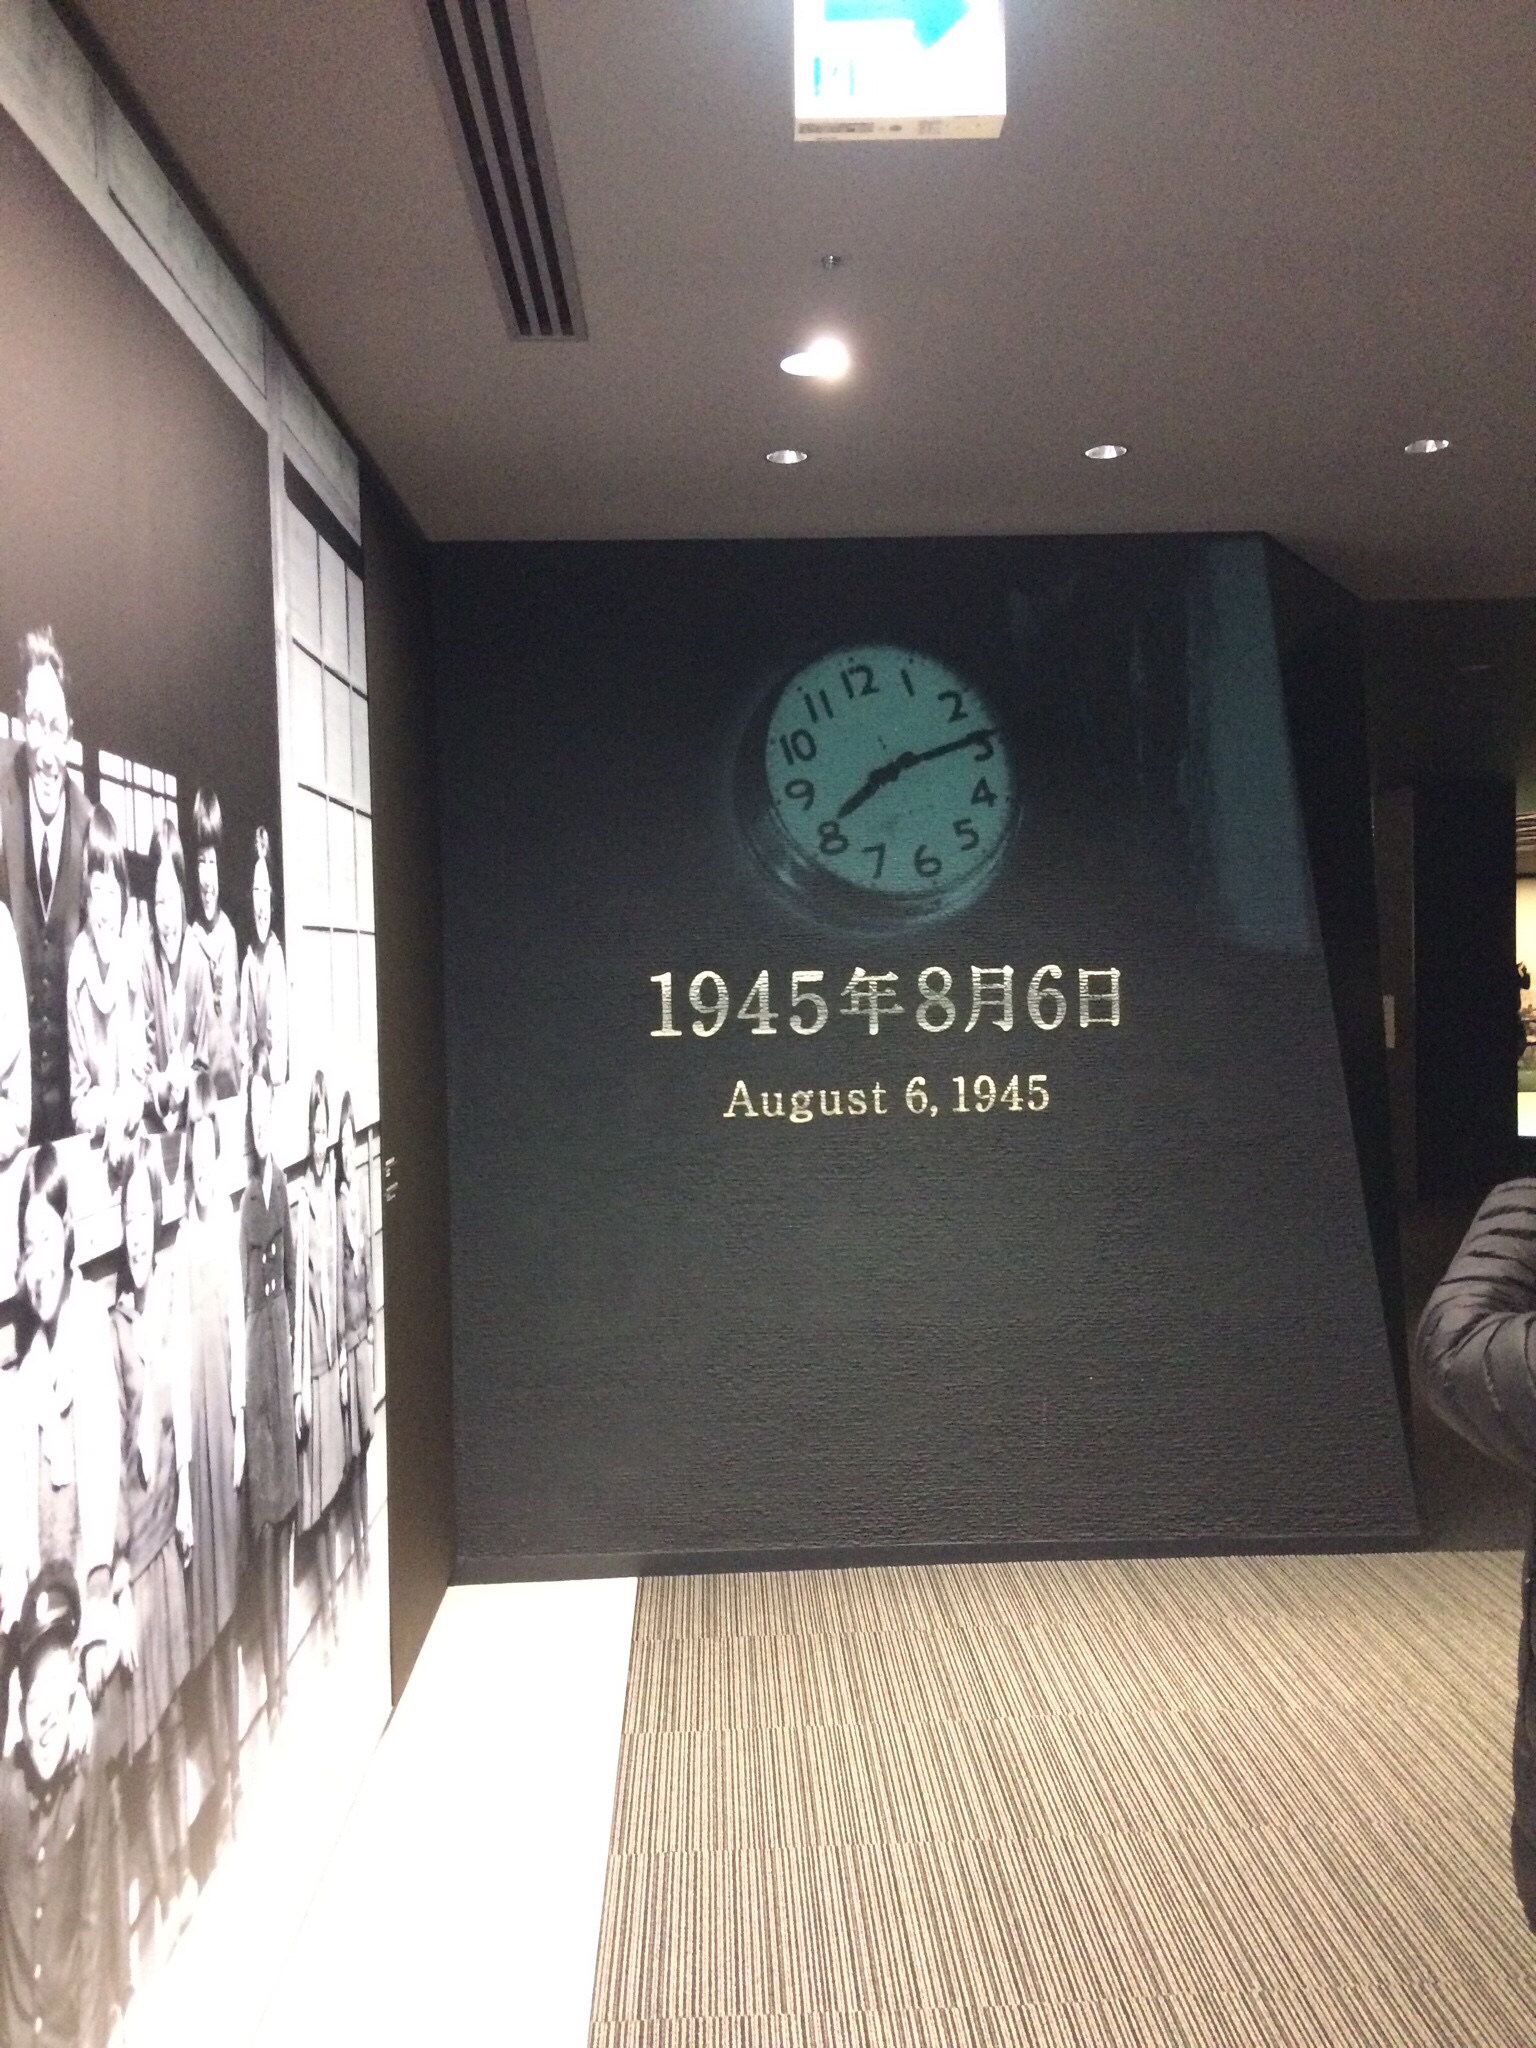 A stopped clock showing the exact time when the bomb hit, as well as the date of the attack in Western and Japanese style